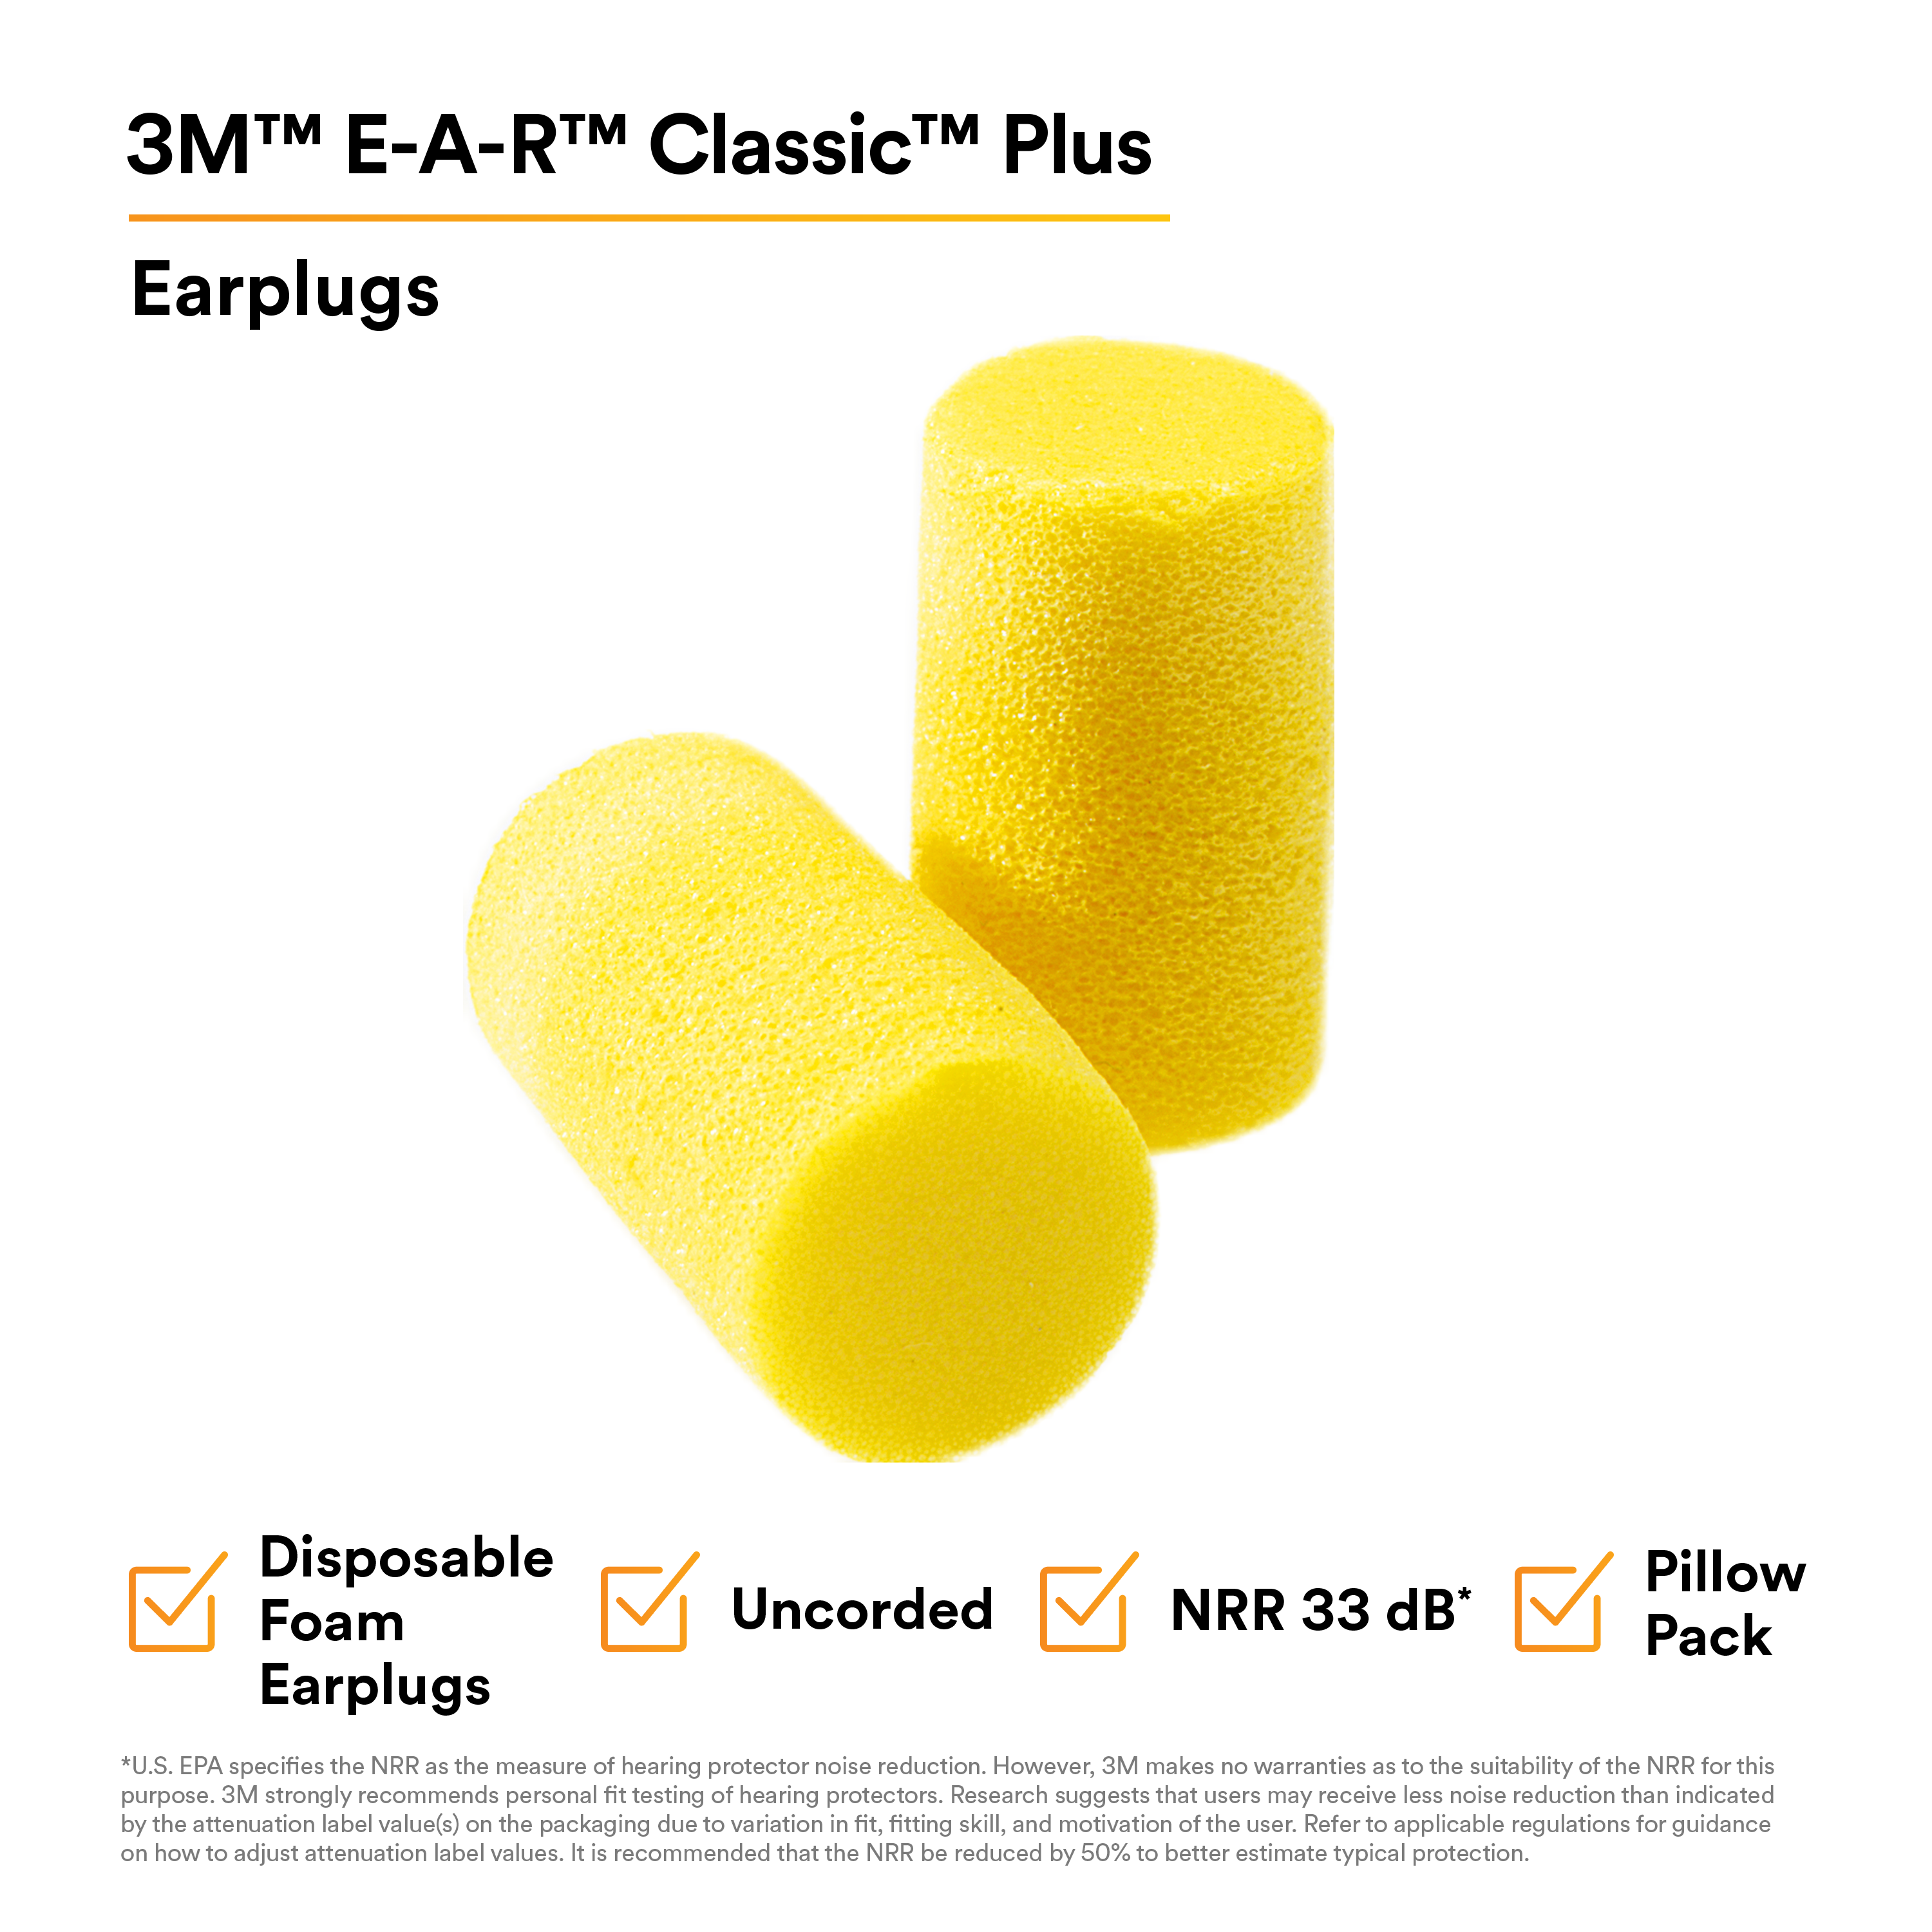 3M™ E-A-R™ Classic™ Plus Earplugs 310-1101, Uncorded, Pillow Pack, 2000